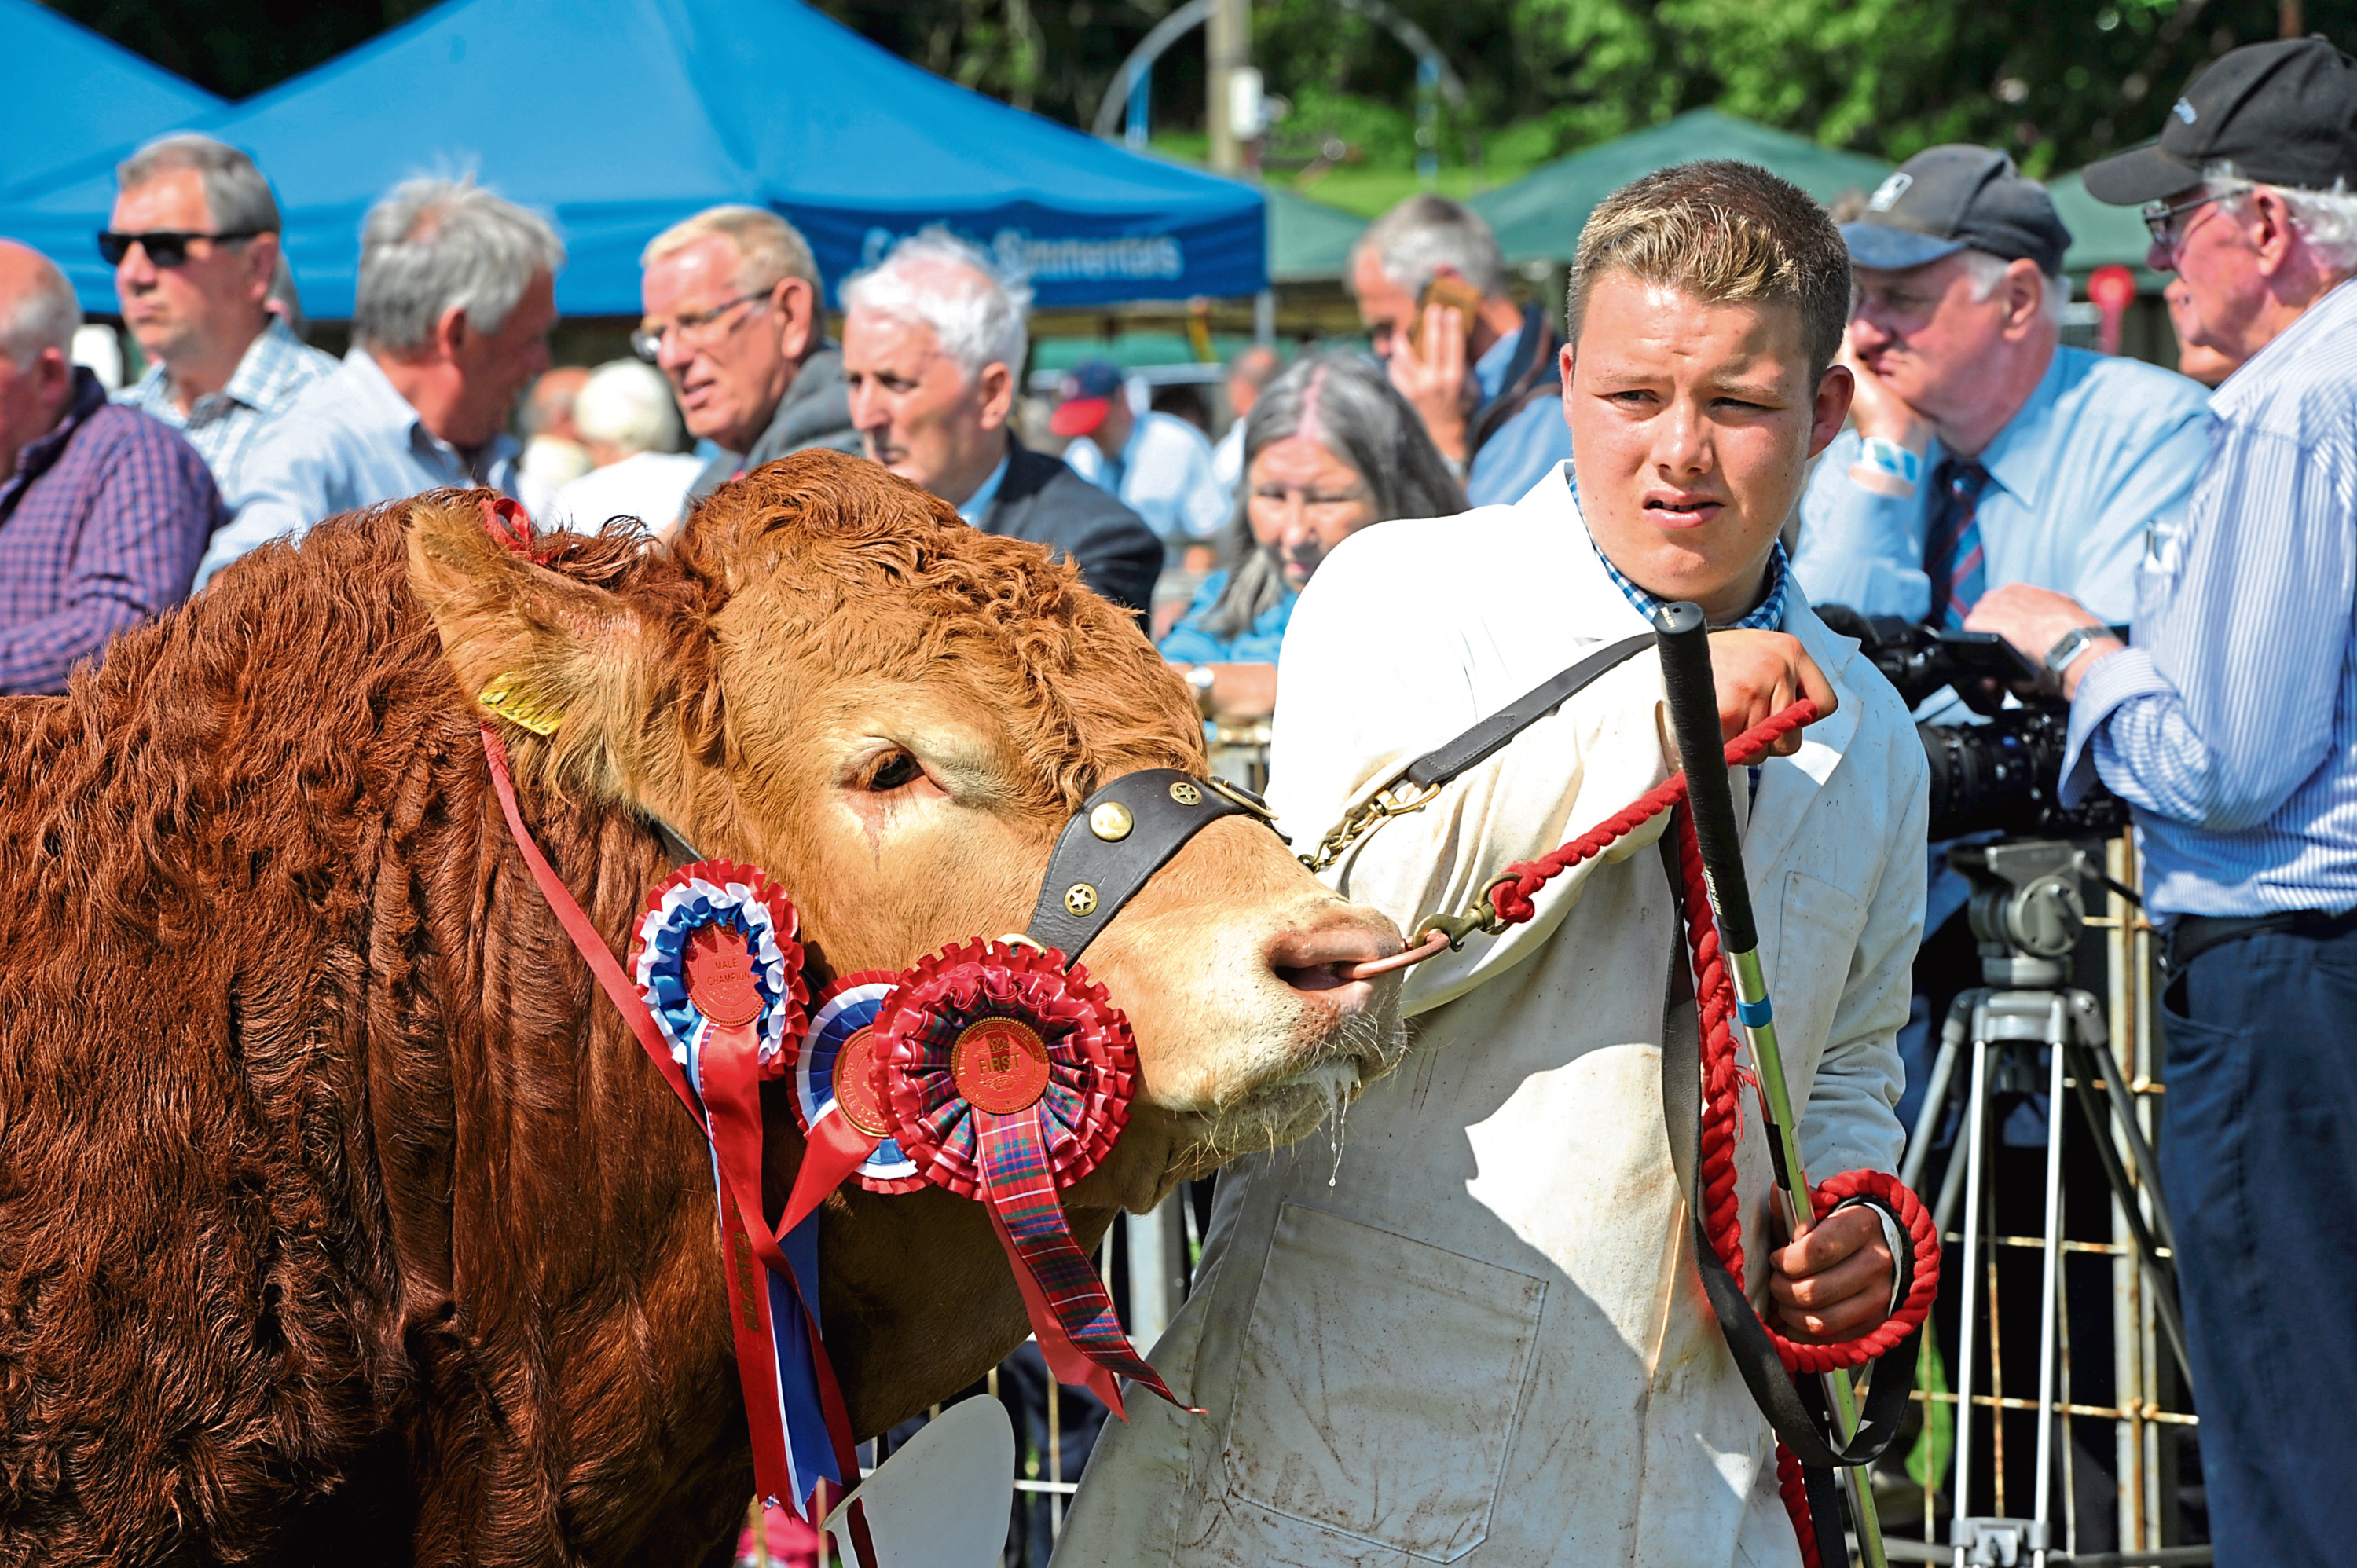 Limousin breeders will flock to the two-day event in August 2020.